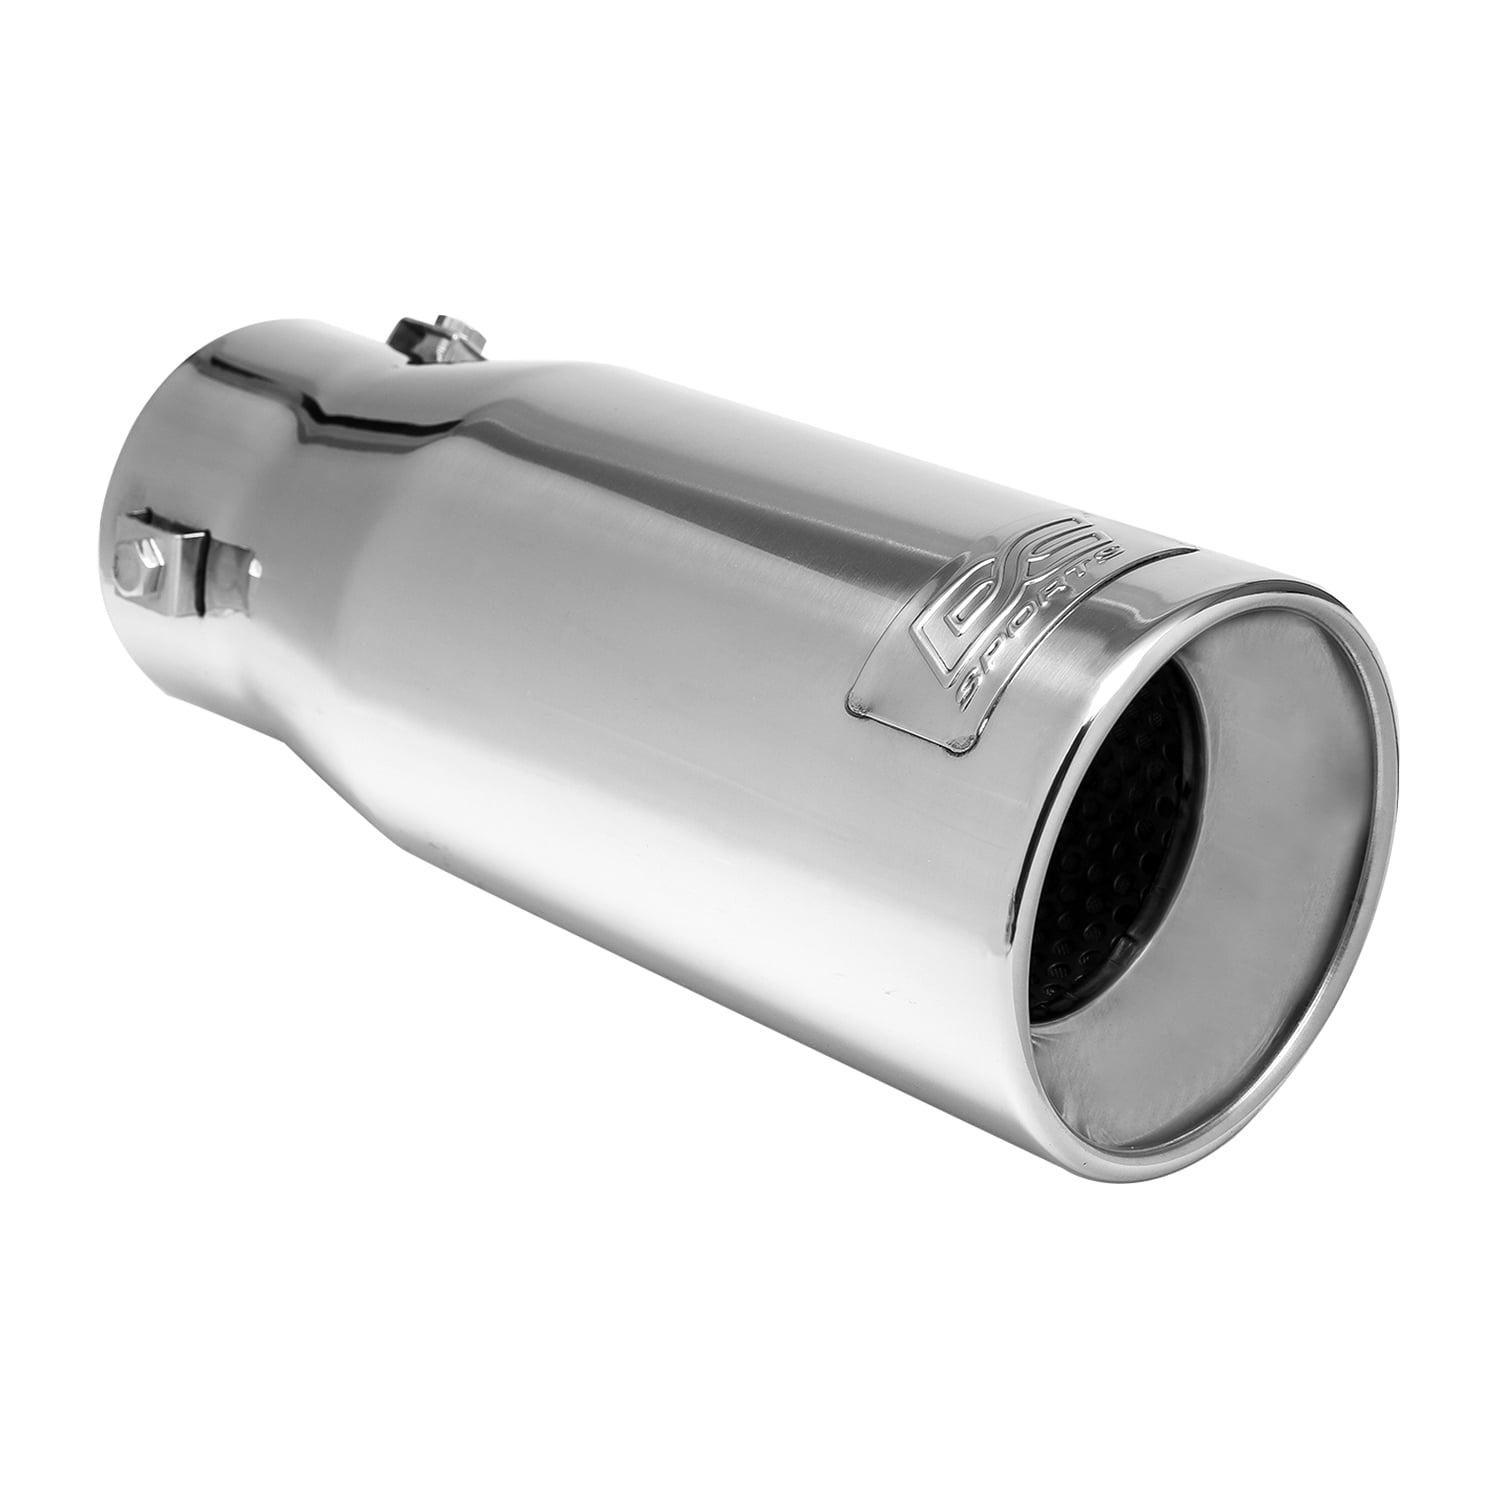 DC Sports Universal Stainless Steel Exhaust Muffler 2" Inlet 4 25" Outlet 